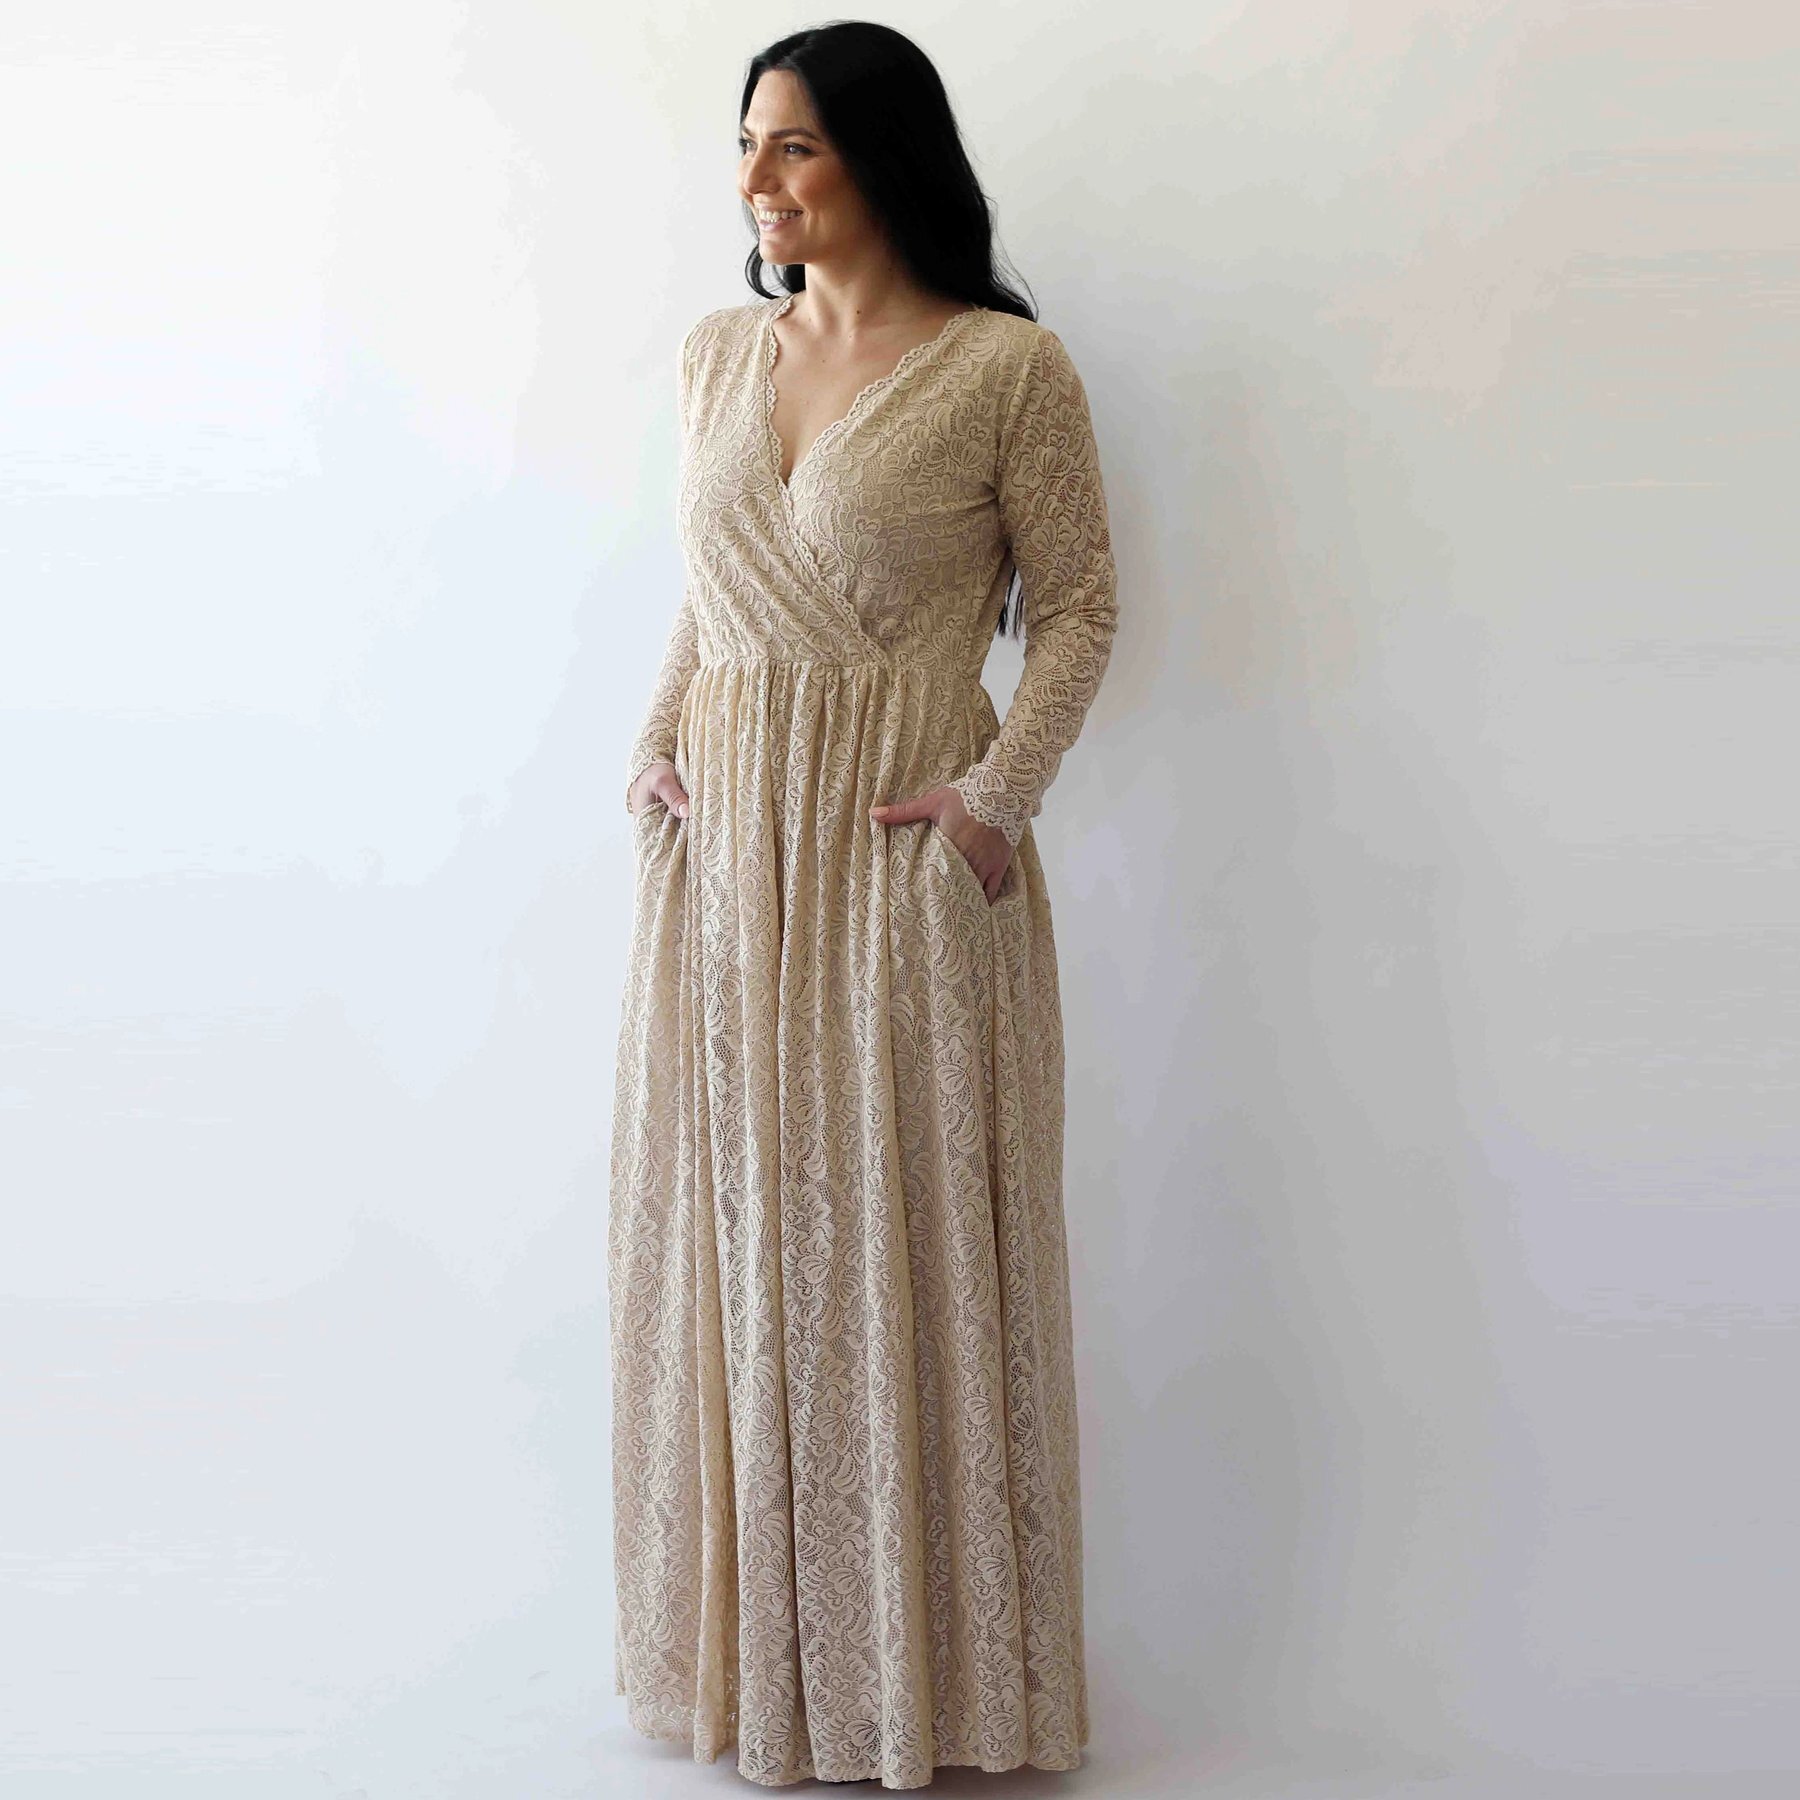 Plus Size Wedding Dresses With Sleeves ...